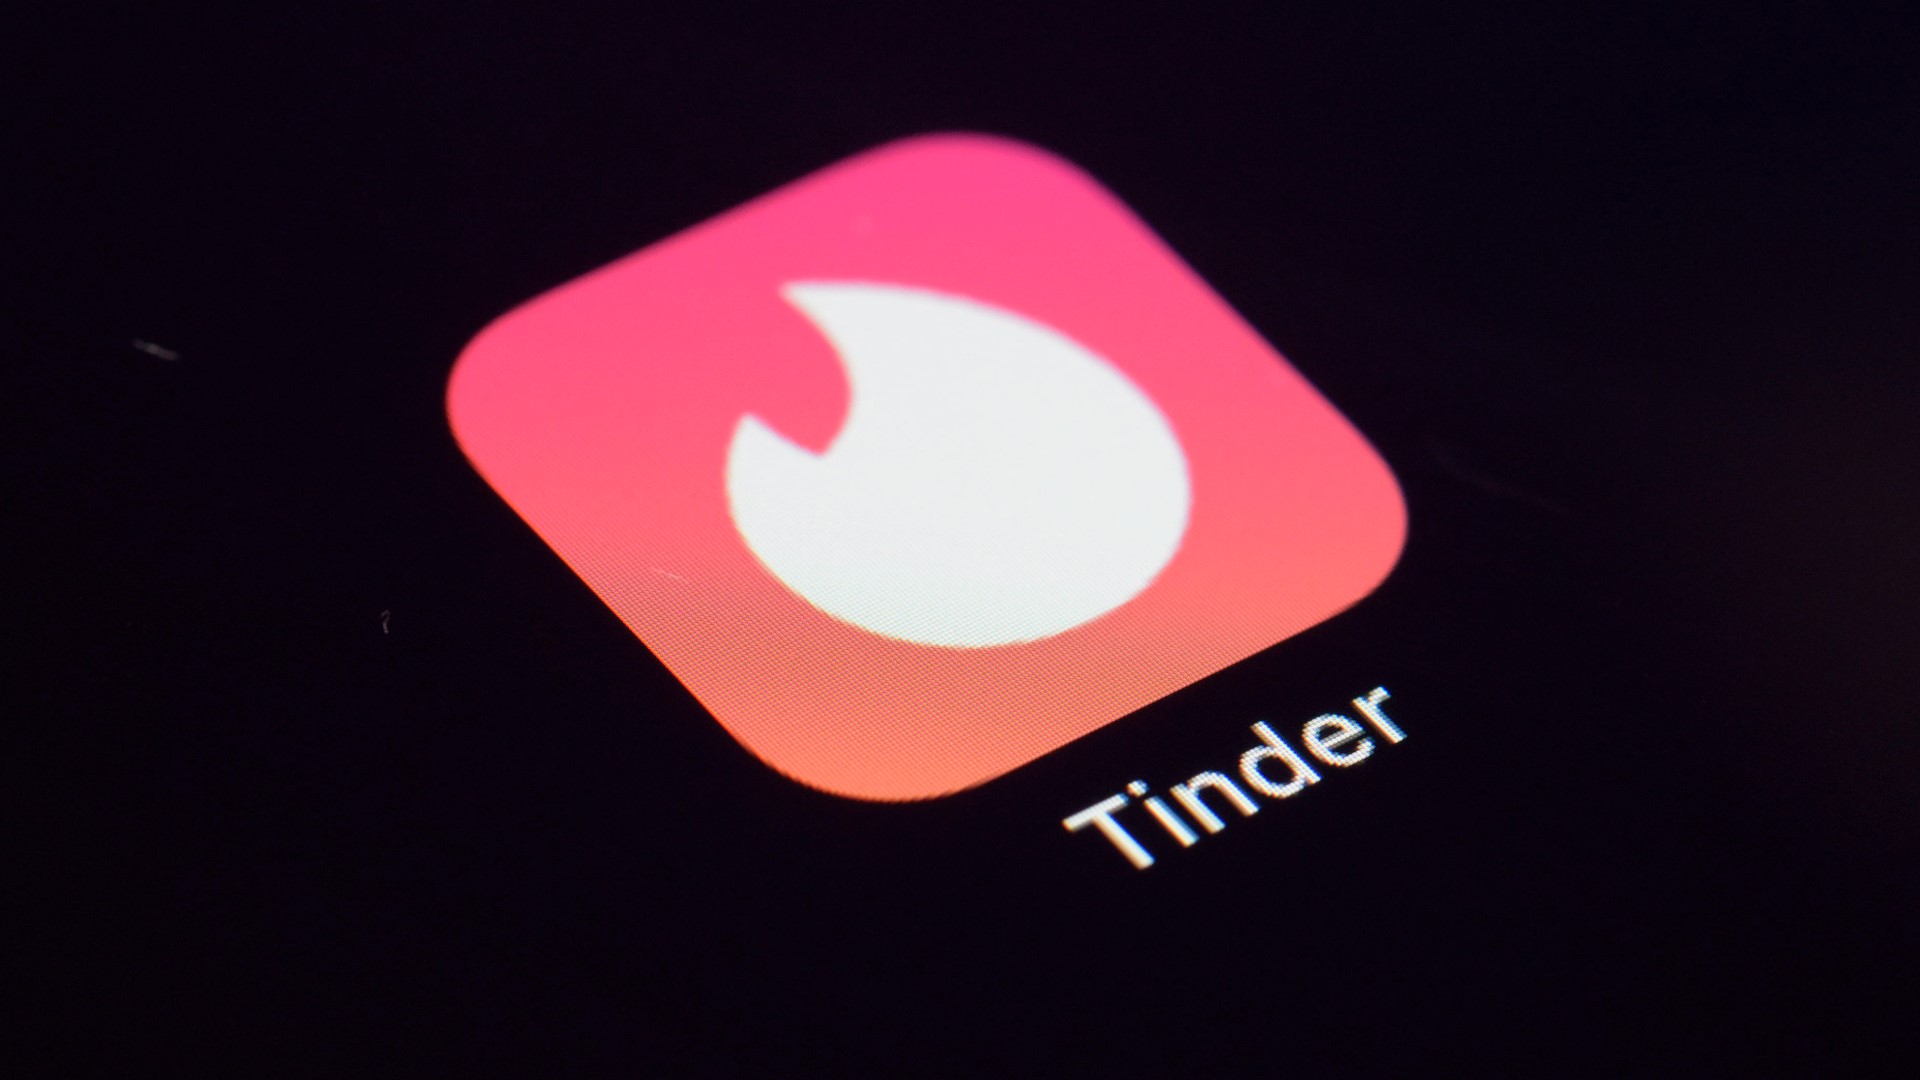 The lawsuit claims the apps turn users into “addicts” who purchase ever-more-expensive subscriptions to access special features that promise romance and matches.